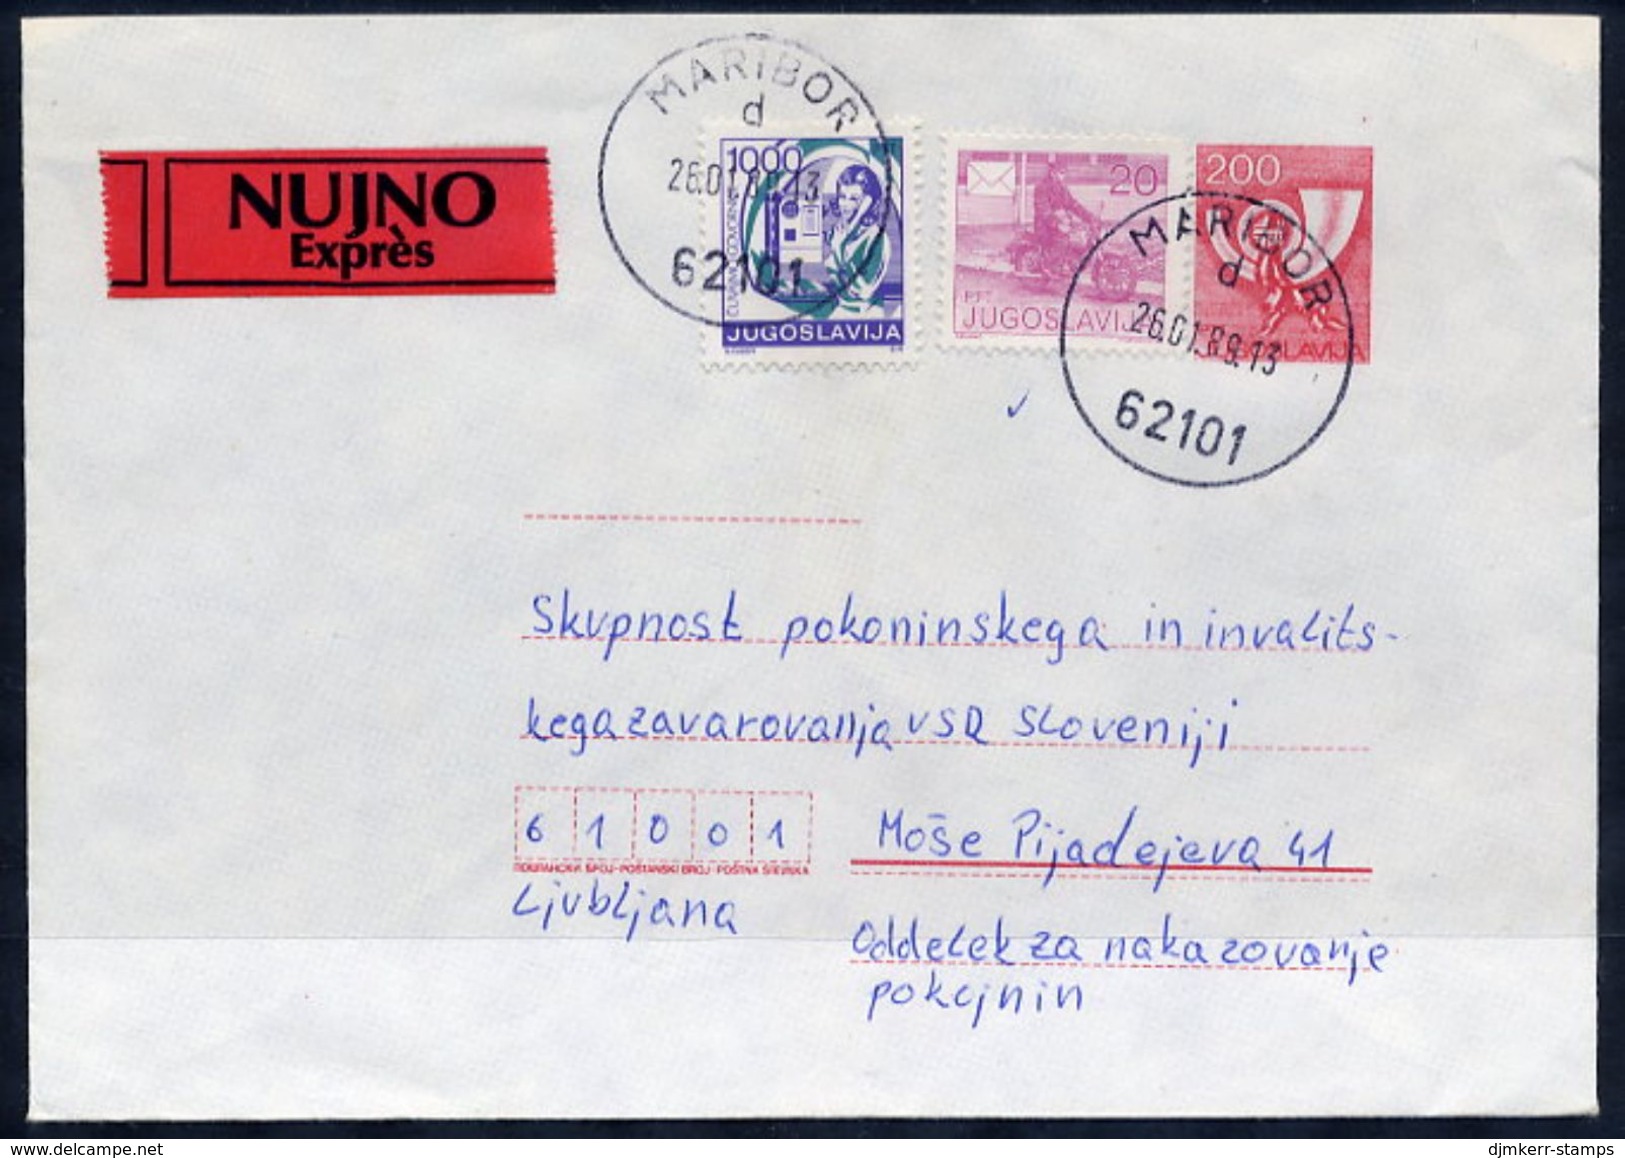 YUGOSLAVIA 1988 Posthorn 200 D.stationery Envelope With  Used With Additional Franking And Express Label.  Michel U82 - Entiers Postaux